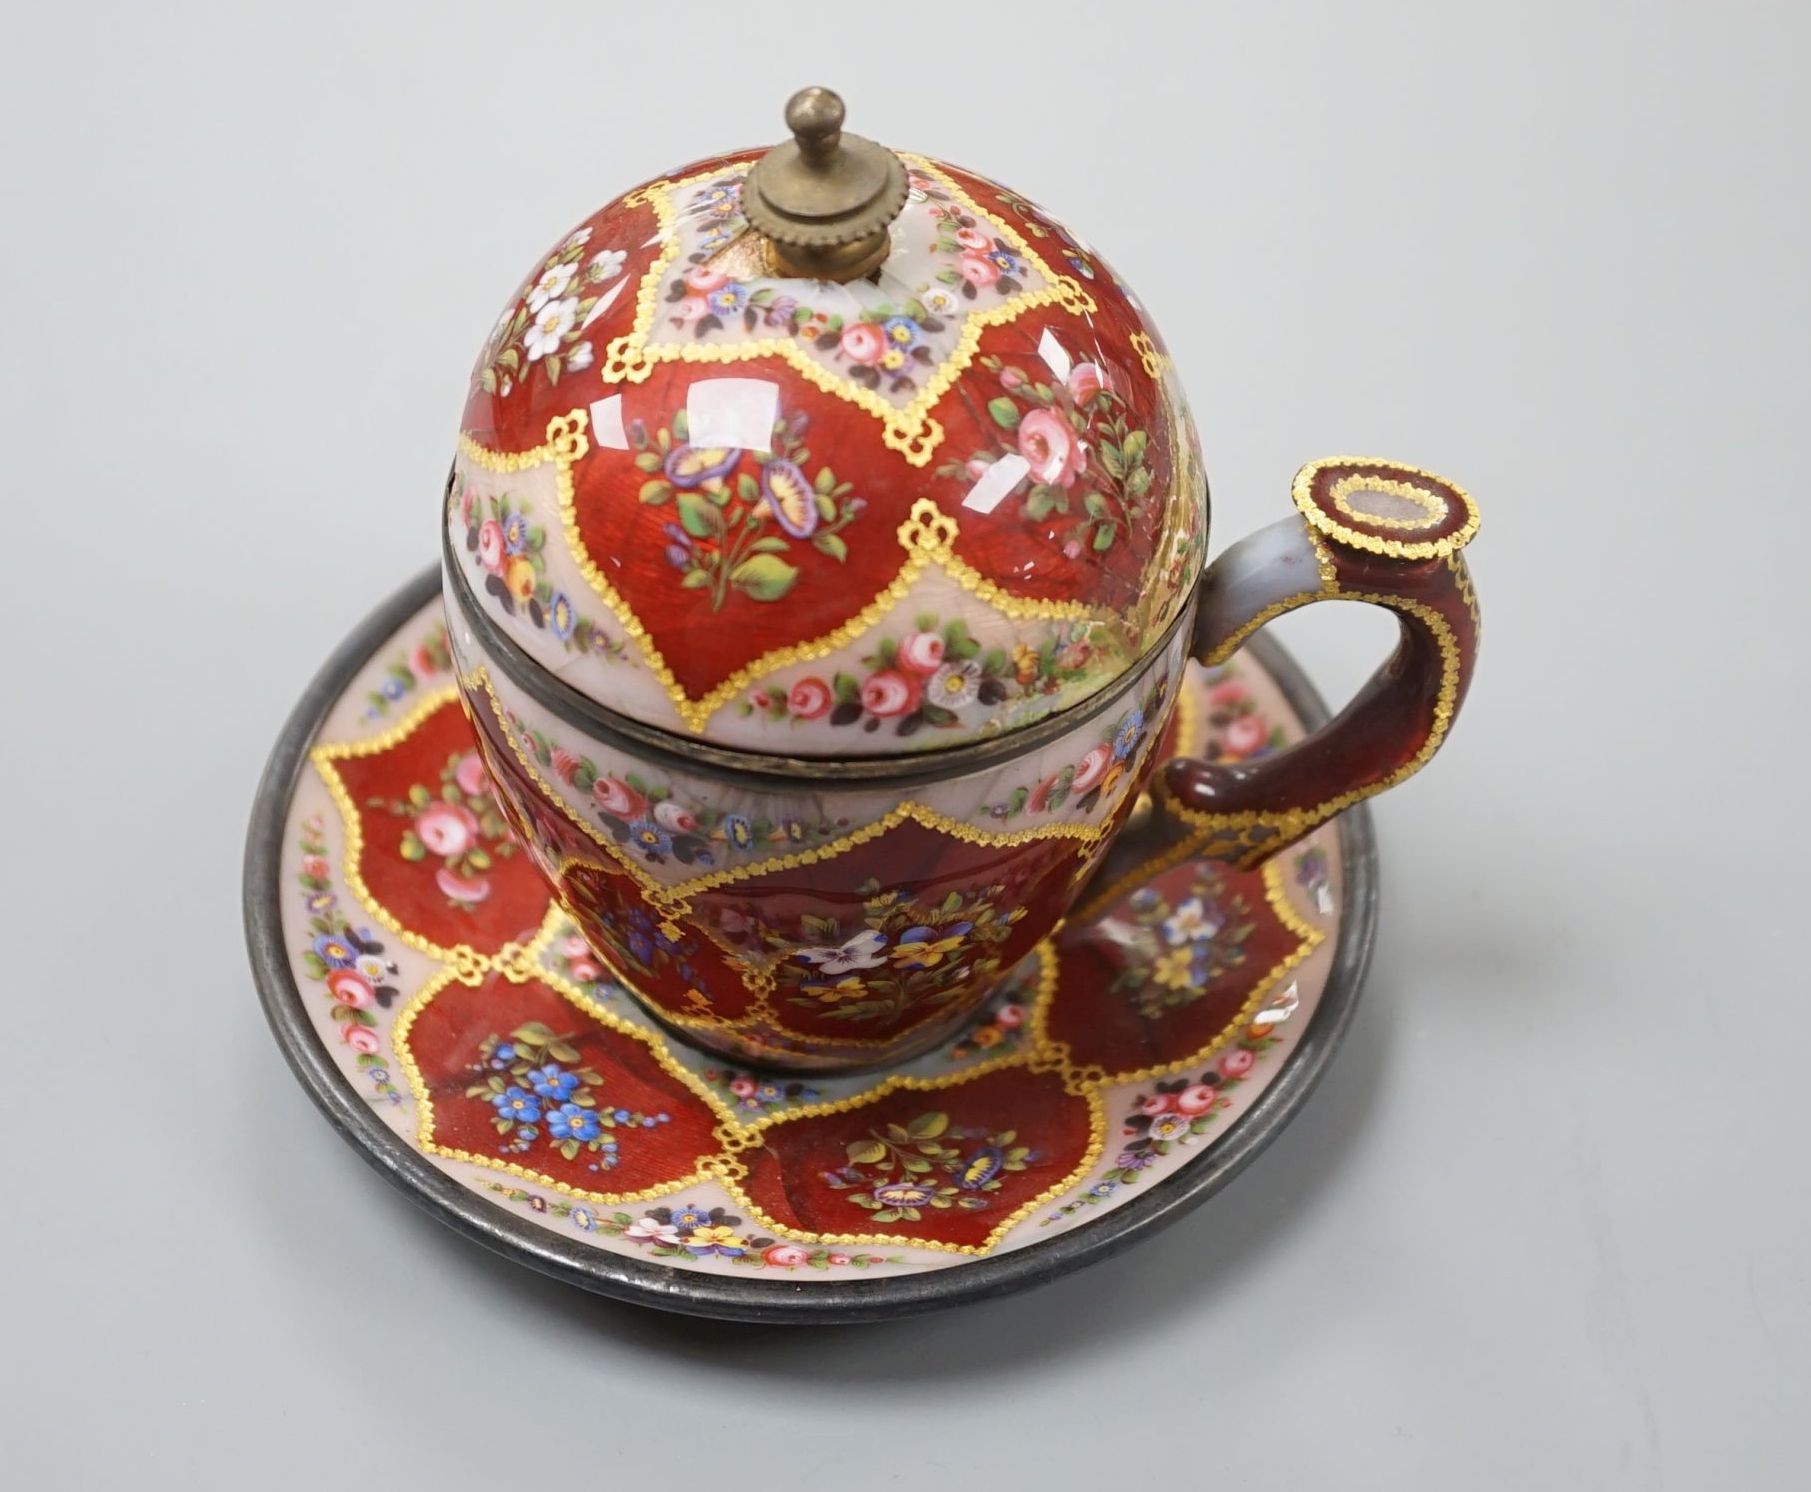 A 19th century Swiss white metal and enamel jam or sugar pot, cover and stand, made for the Ottoman market, 12.5 cms high.